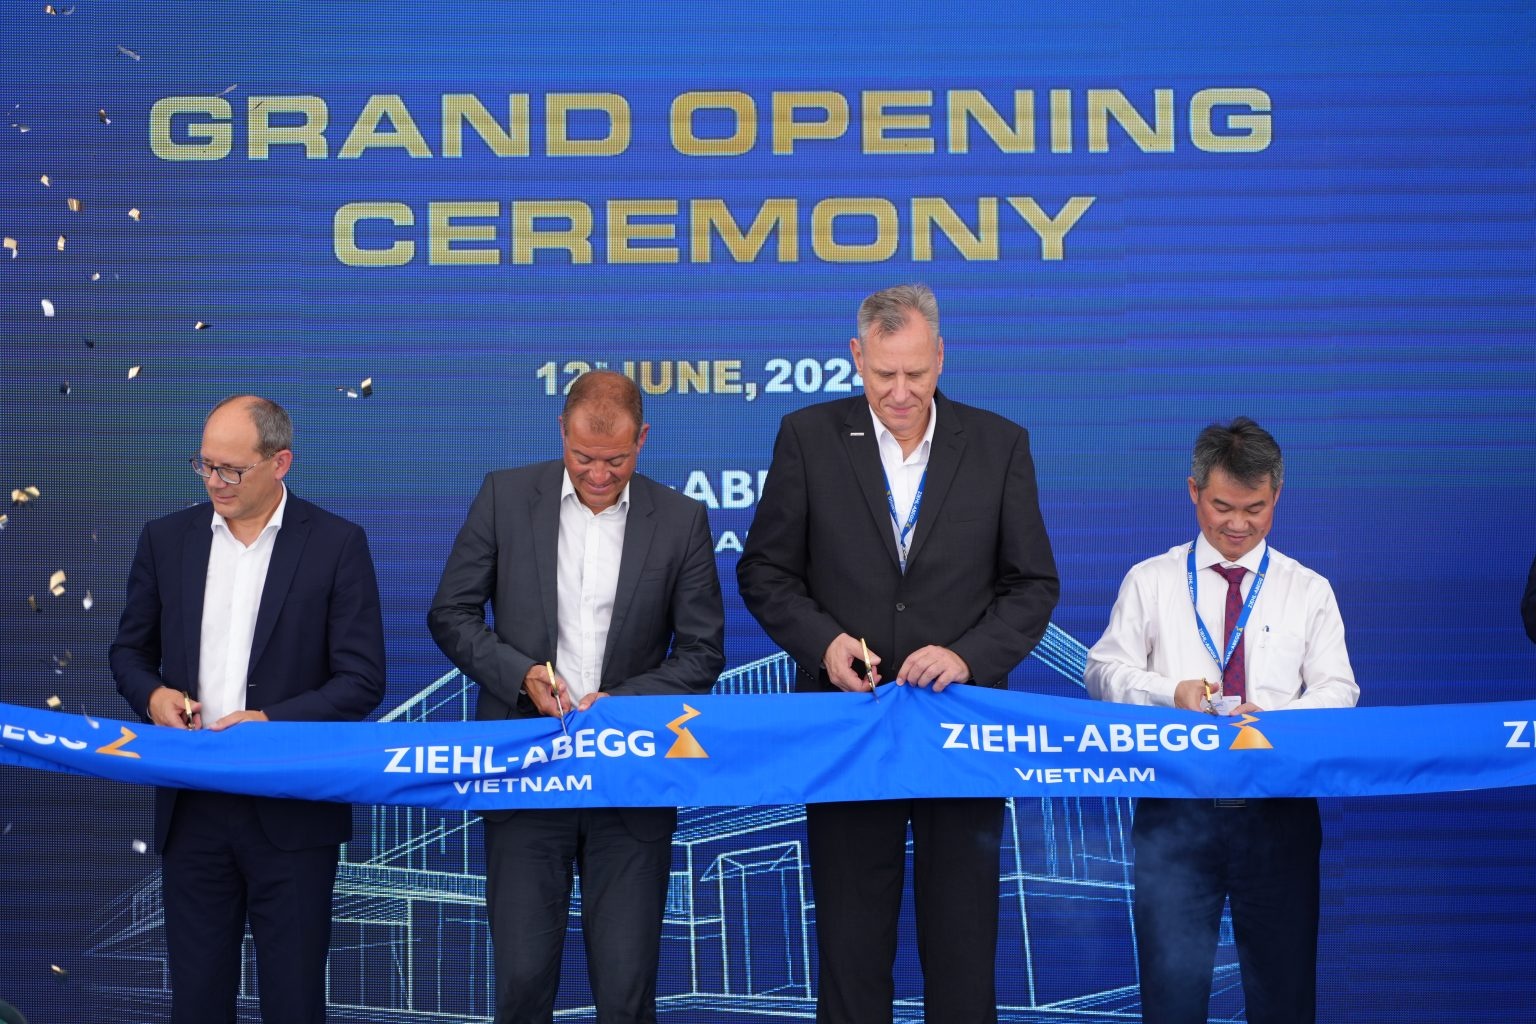 germanys ziehl abegg vietnam inaugurates new production facility in dong nai